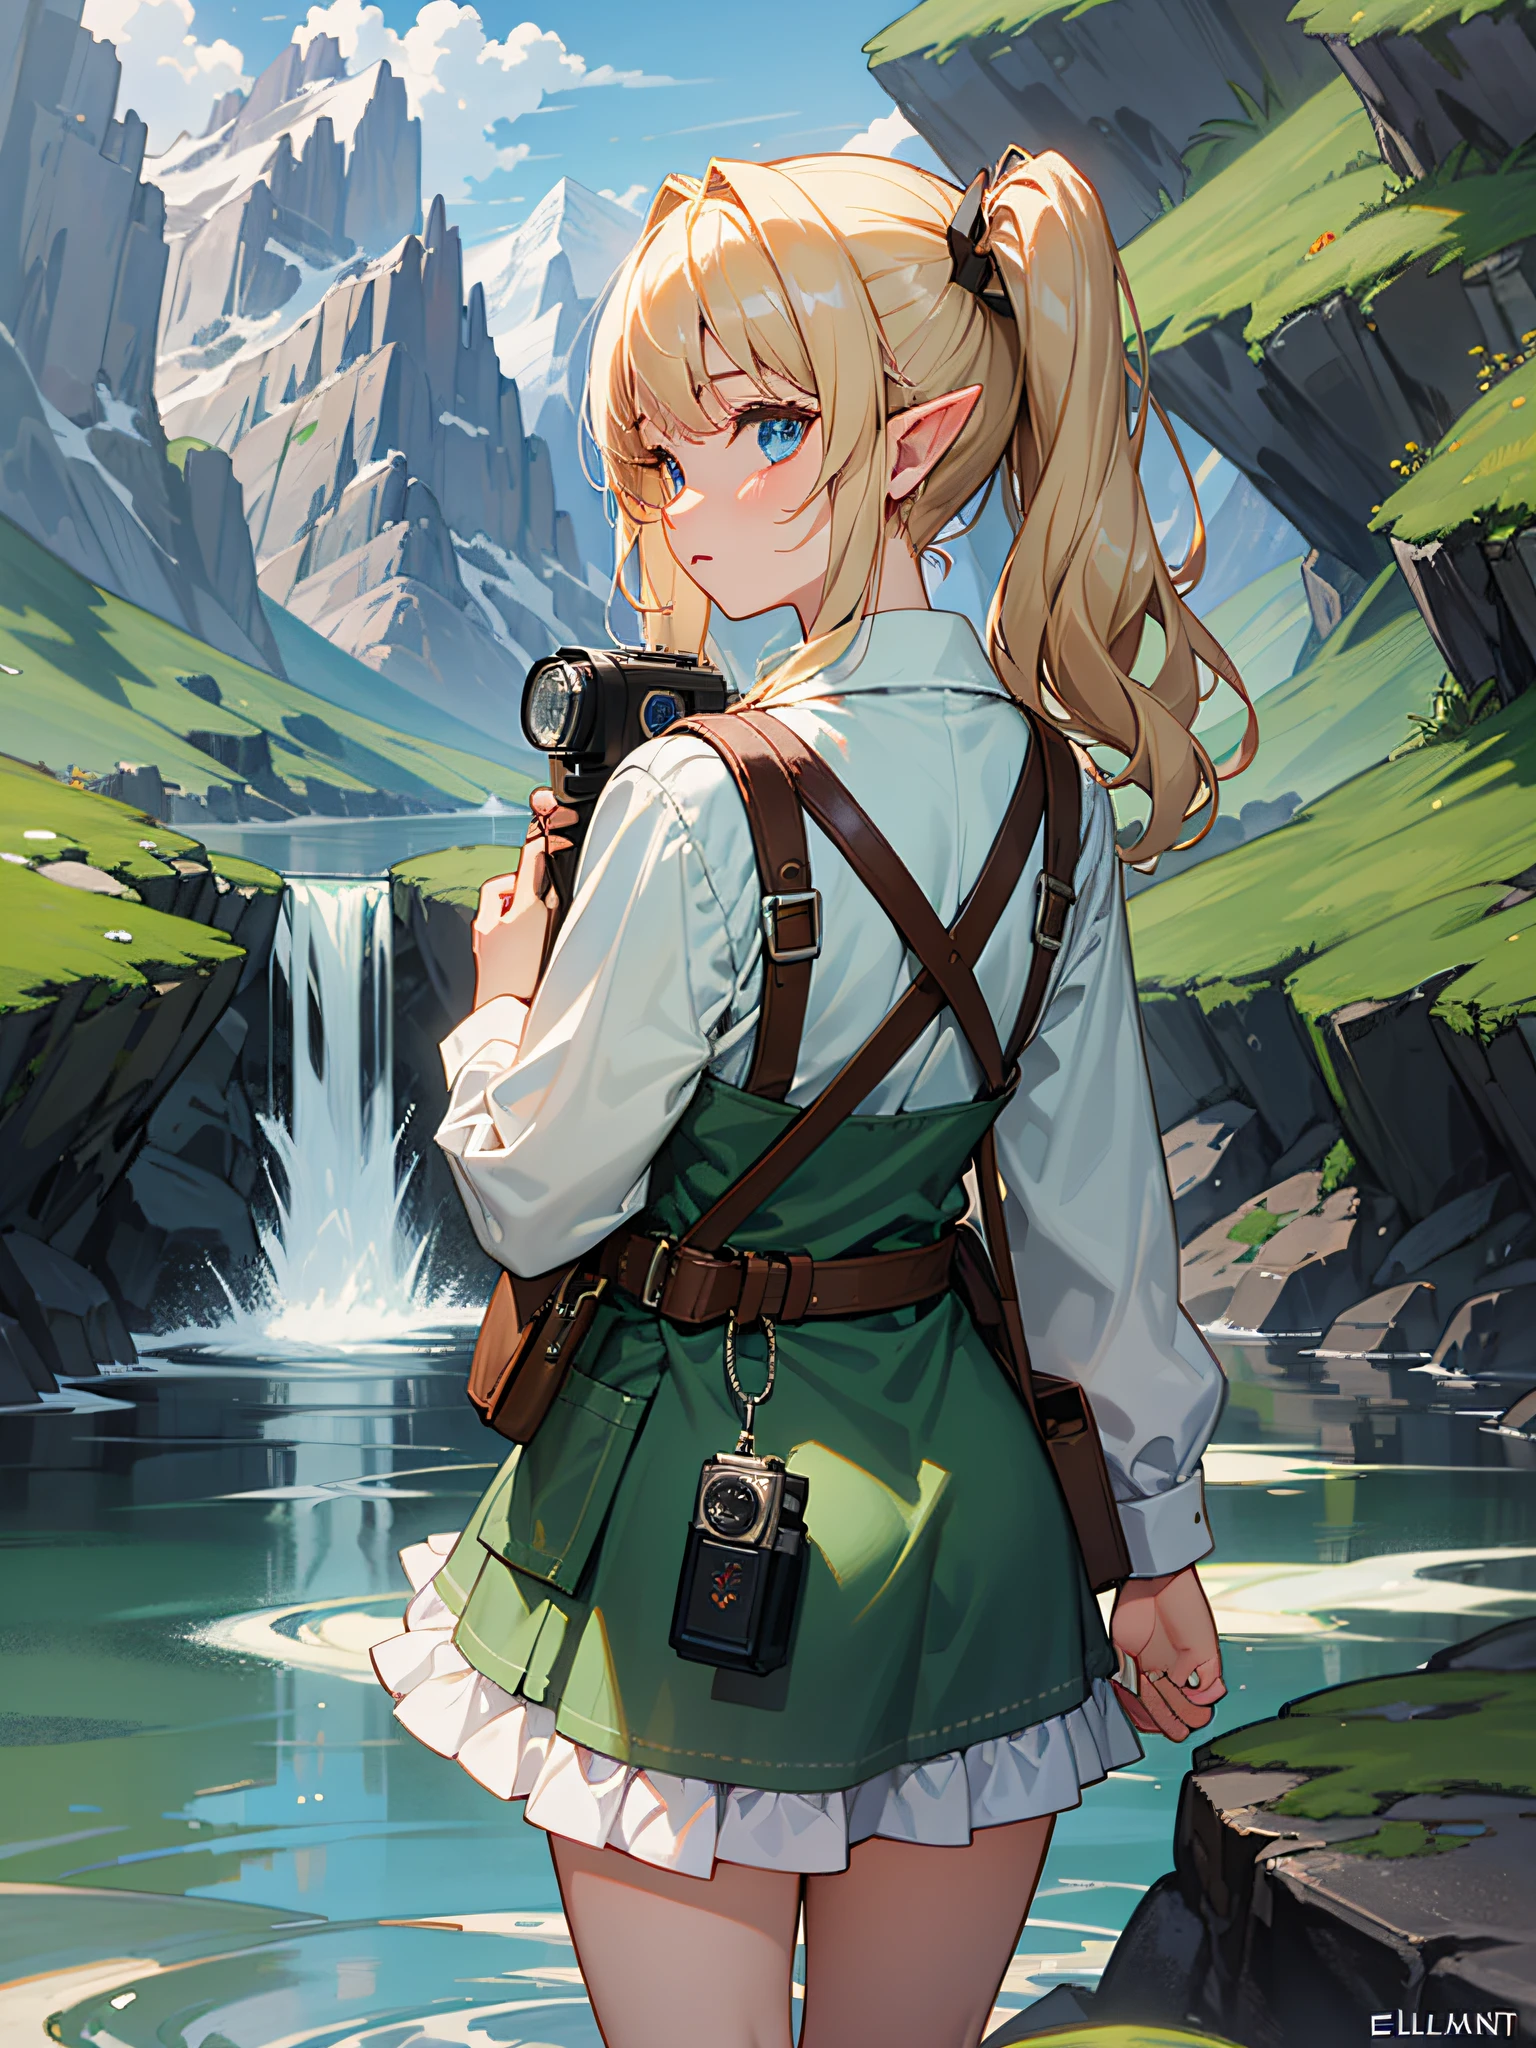 elvish, enmaided, solo, full entire body, Rear view, platinum-blonde,twintails, Blue eyes, Green Apron Dress, Leather Pouch, Holding the rangefinder camera, Shooting scenery with majestic mountains and lakes